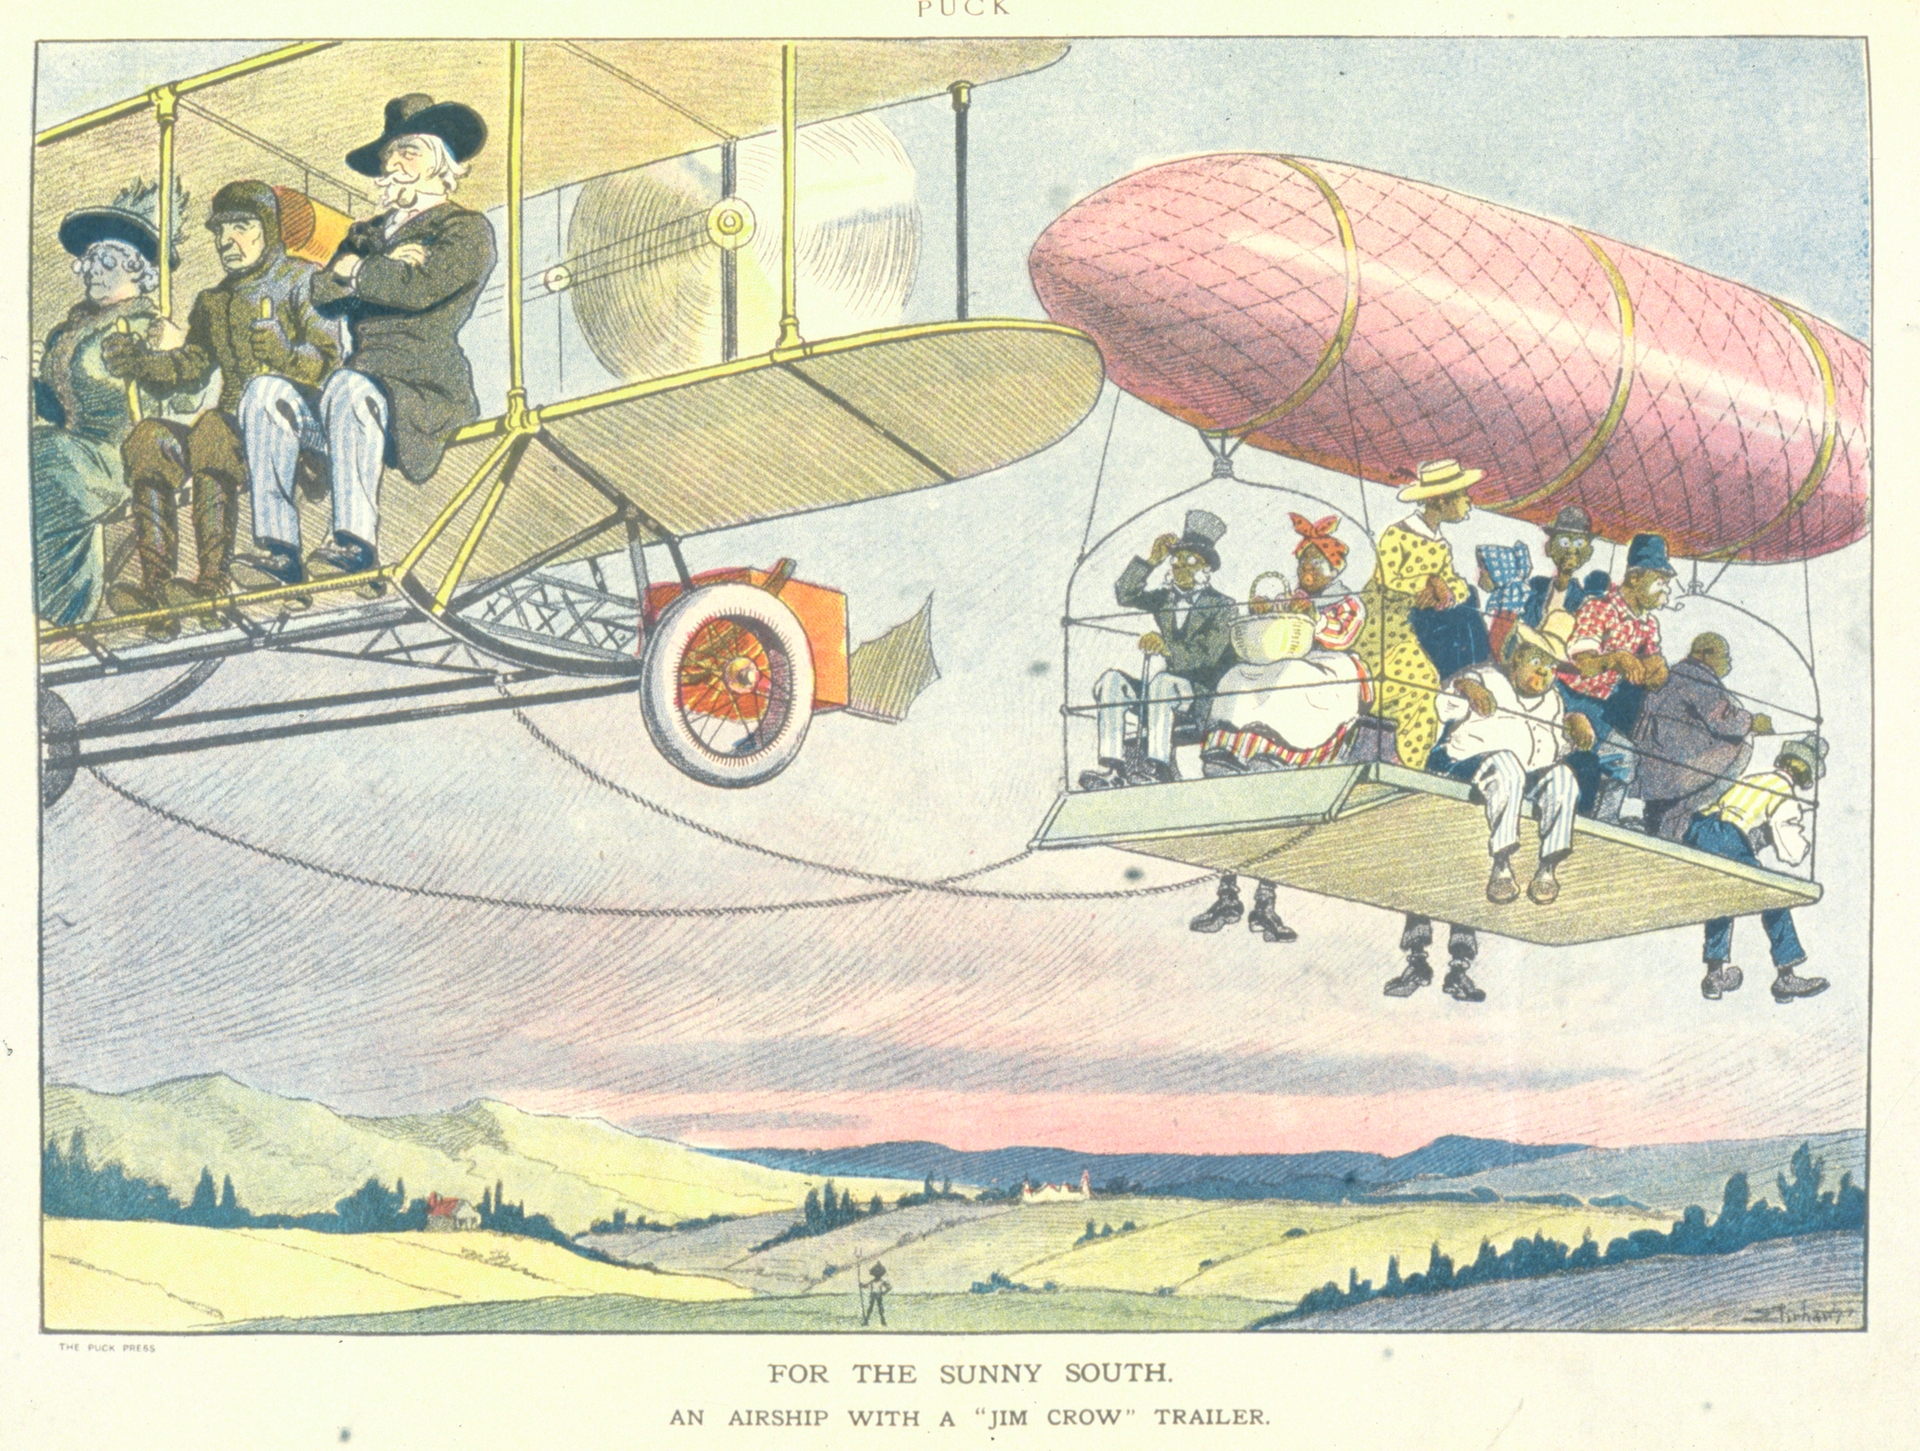 A caricature of the Jim Crow system that shows White people in a plane with Black Americans being pulled on a blimp.